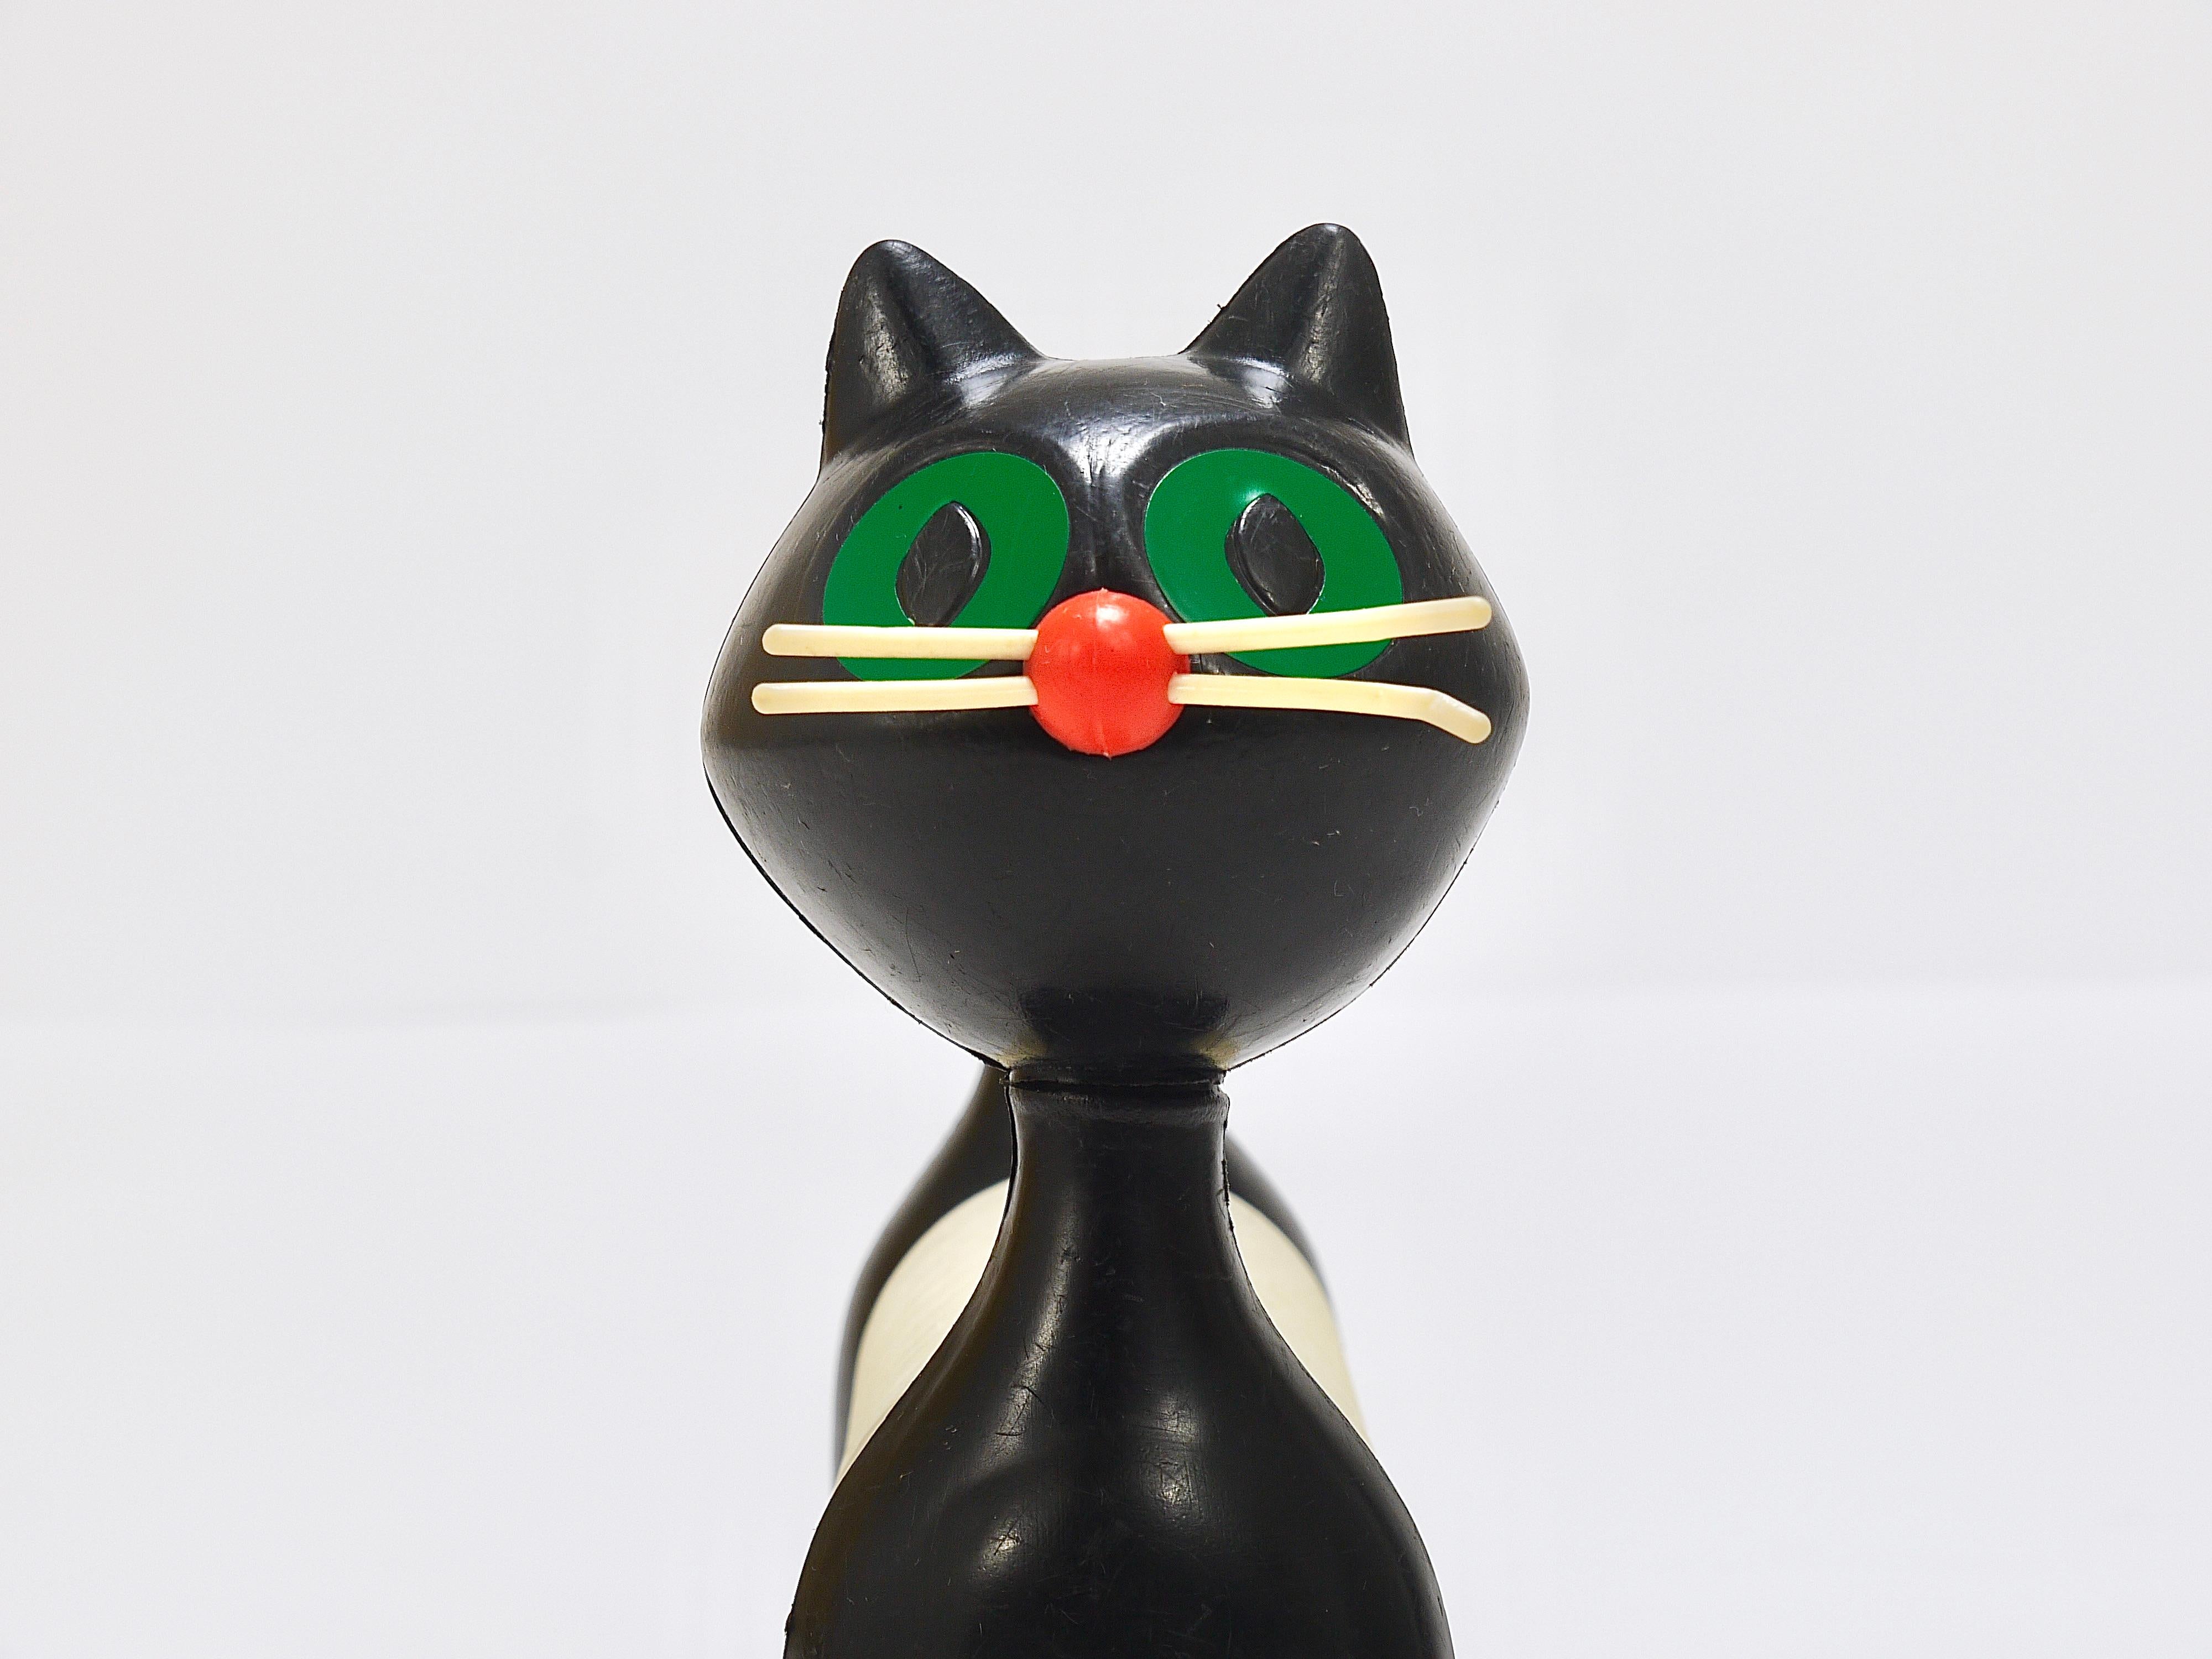 Libuse Niklova Accordion Squeaky Toy Cat „Tomcat“ by Fatra, Czechoslovakia 1960s For Sale 2